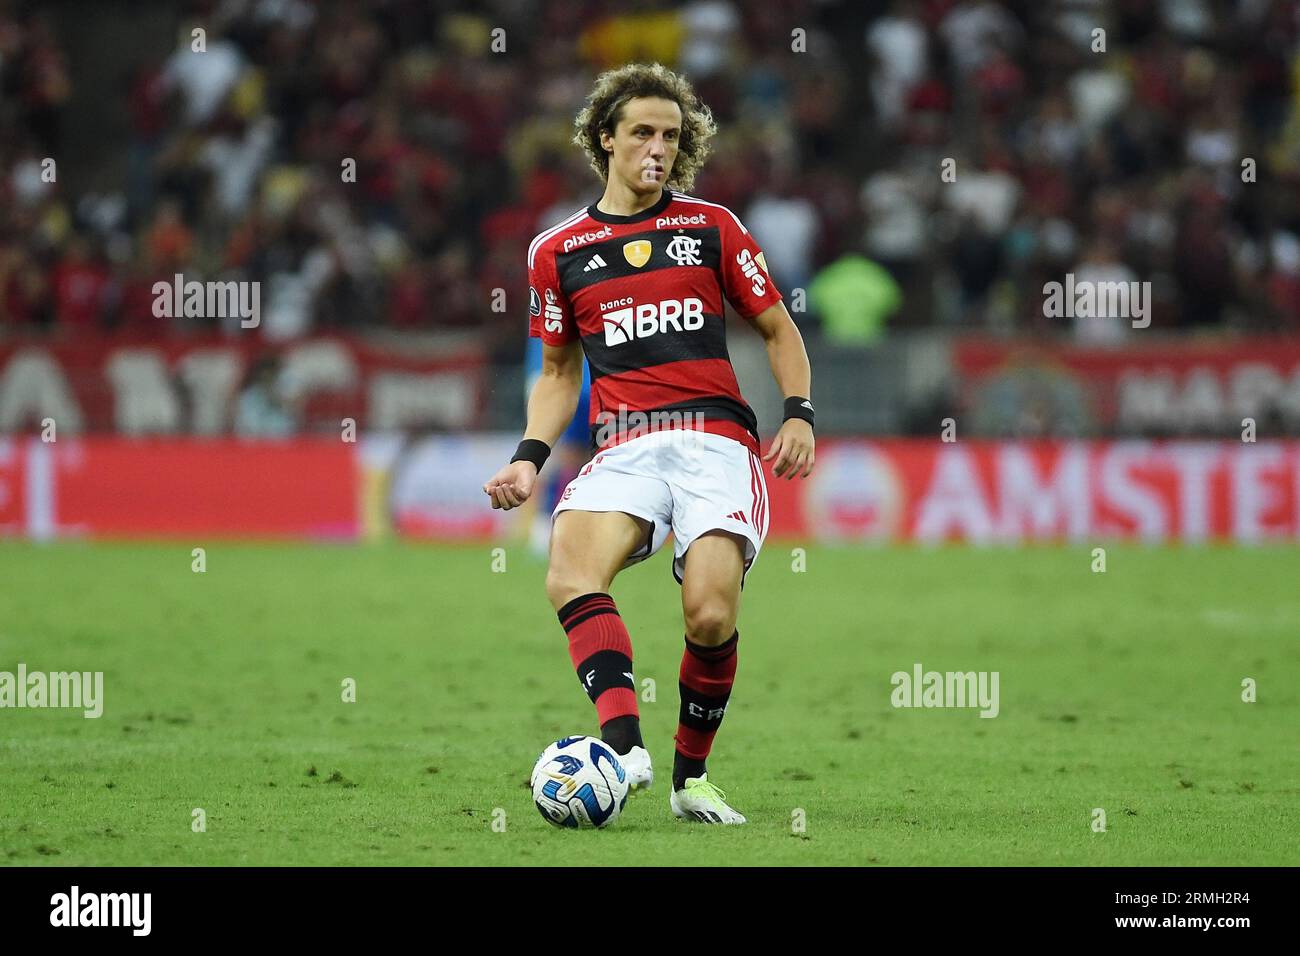 Rio de Janeiro, Brazil, August 3, 2023. Football player David Luiz of the Flamengo team, during a match against Olimpia, for the Libertadores 2023, at Stock Photo